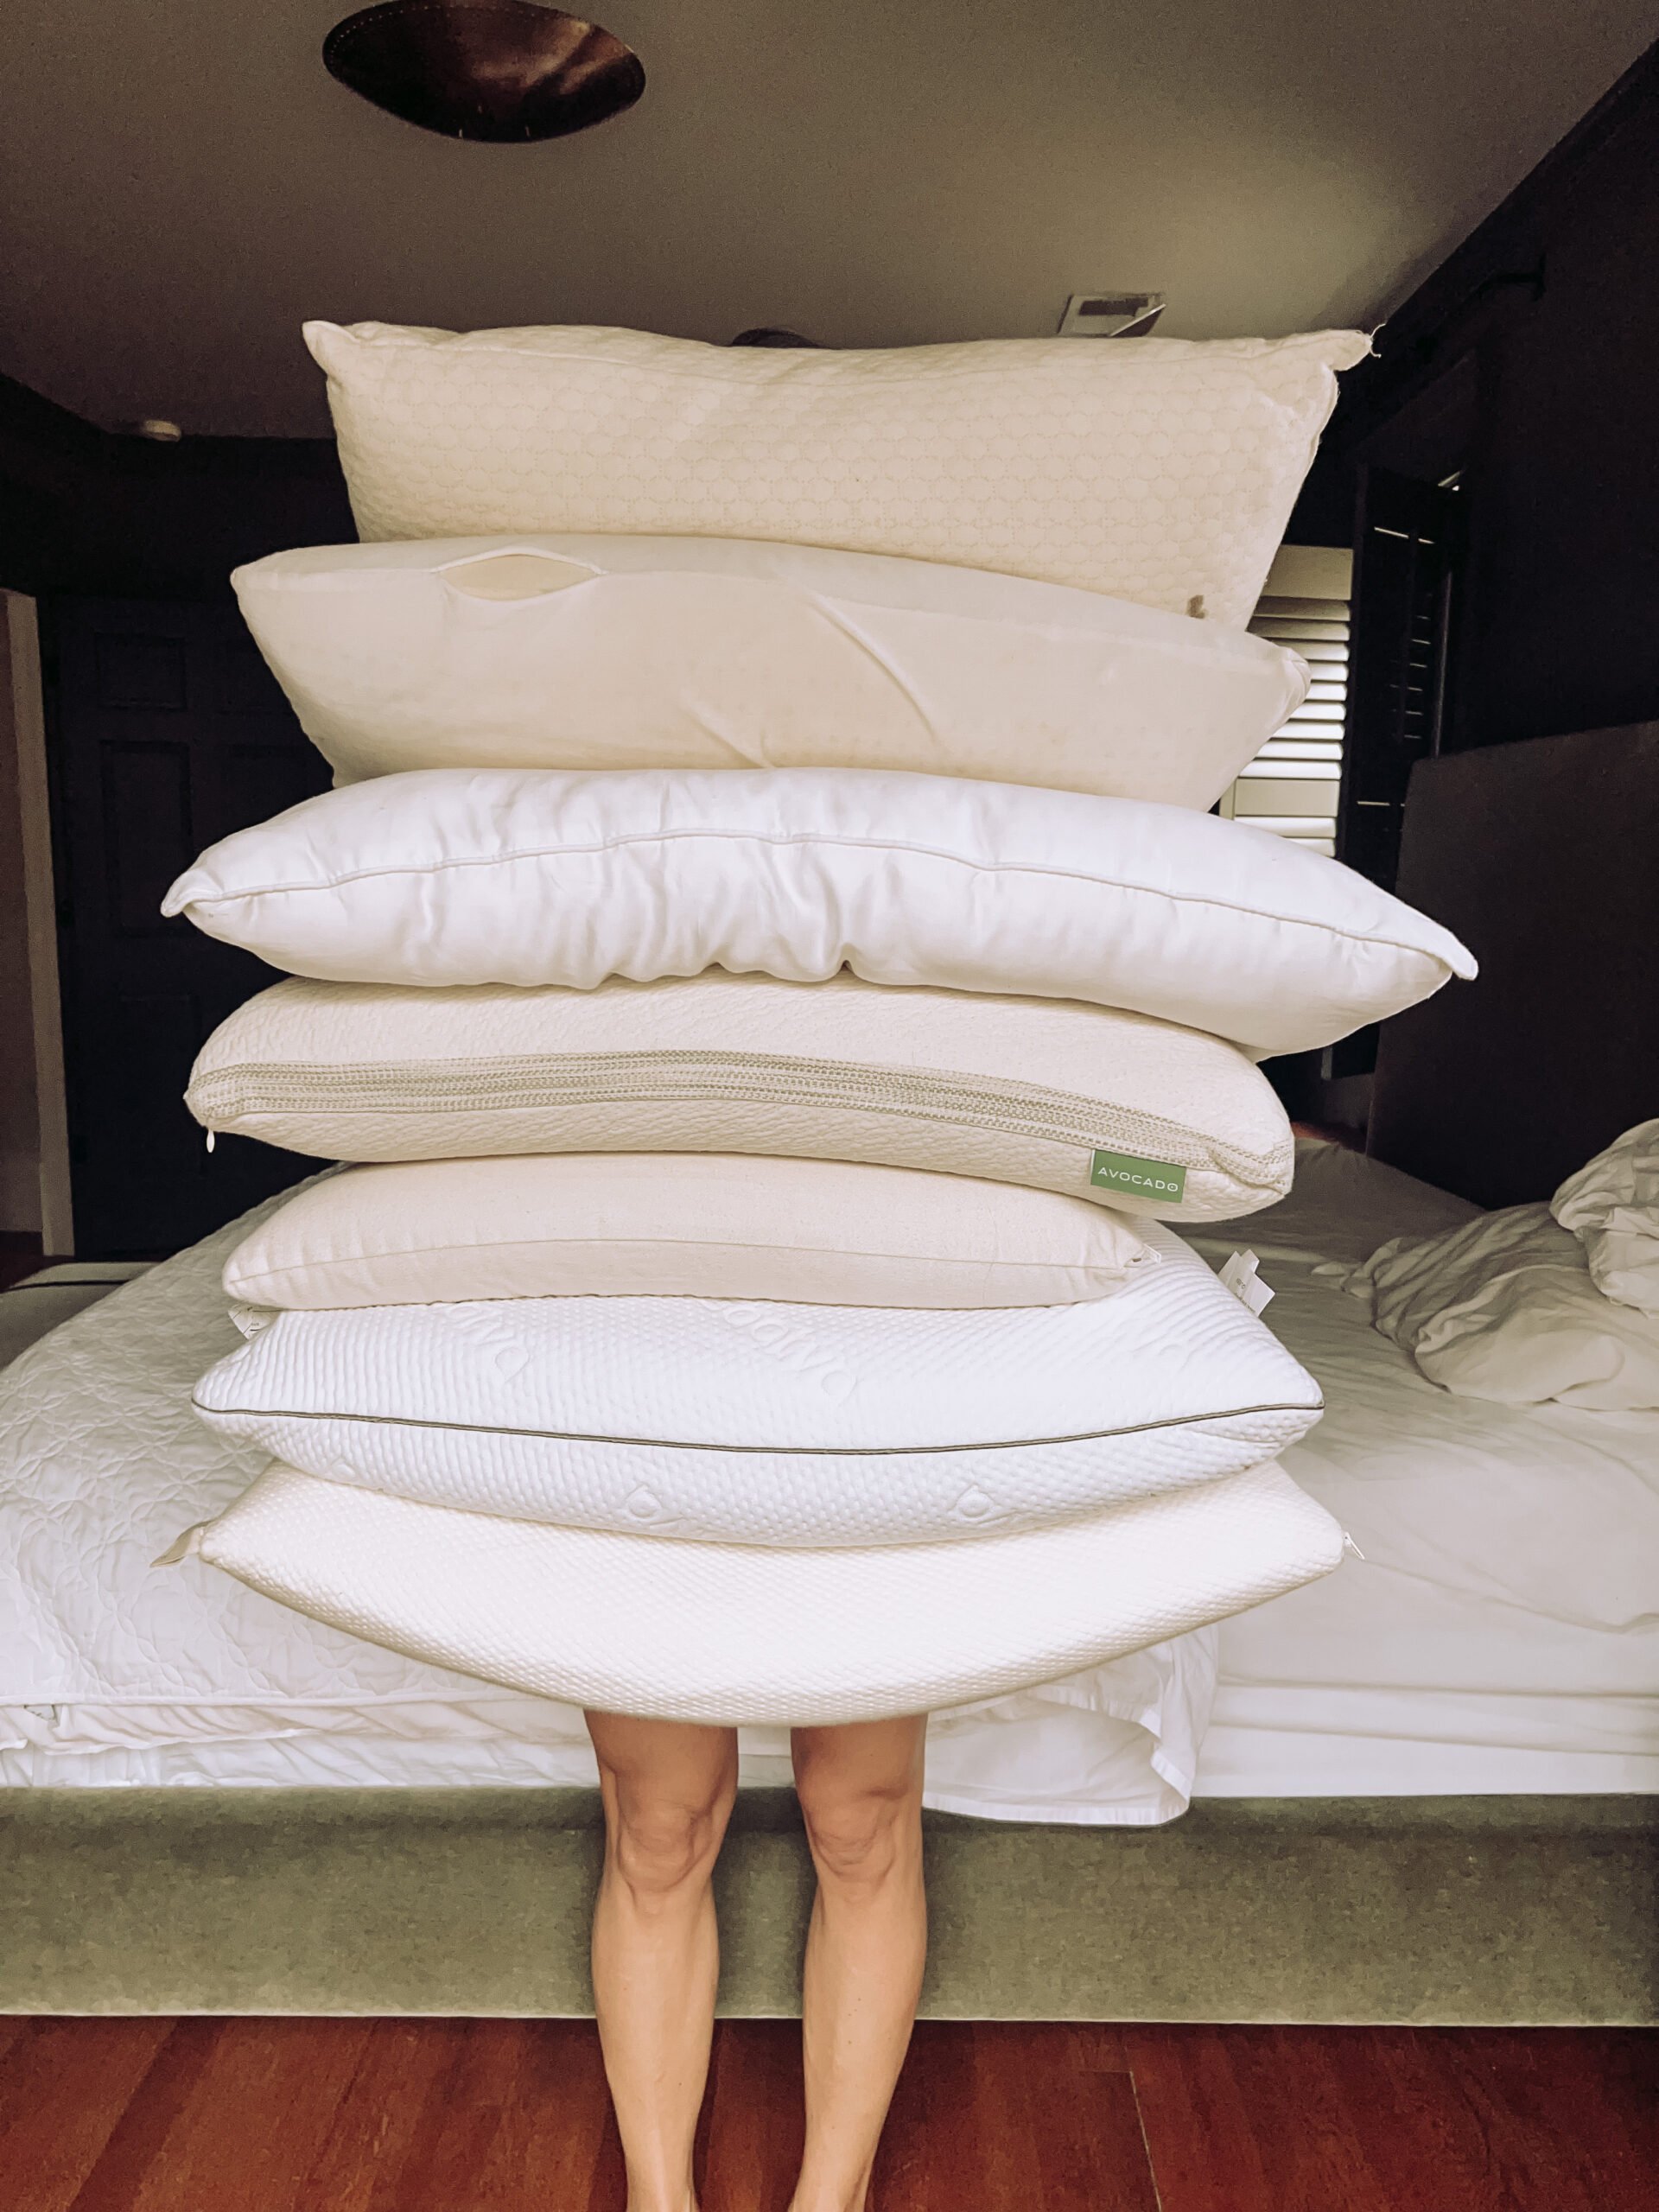 A stack of pillows is held up in front of a person so that only their legs are visible.